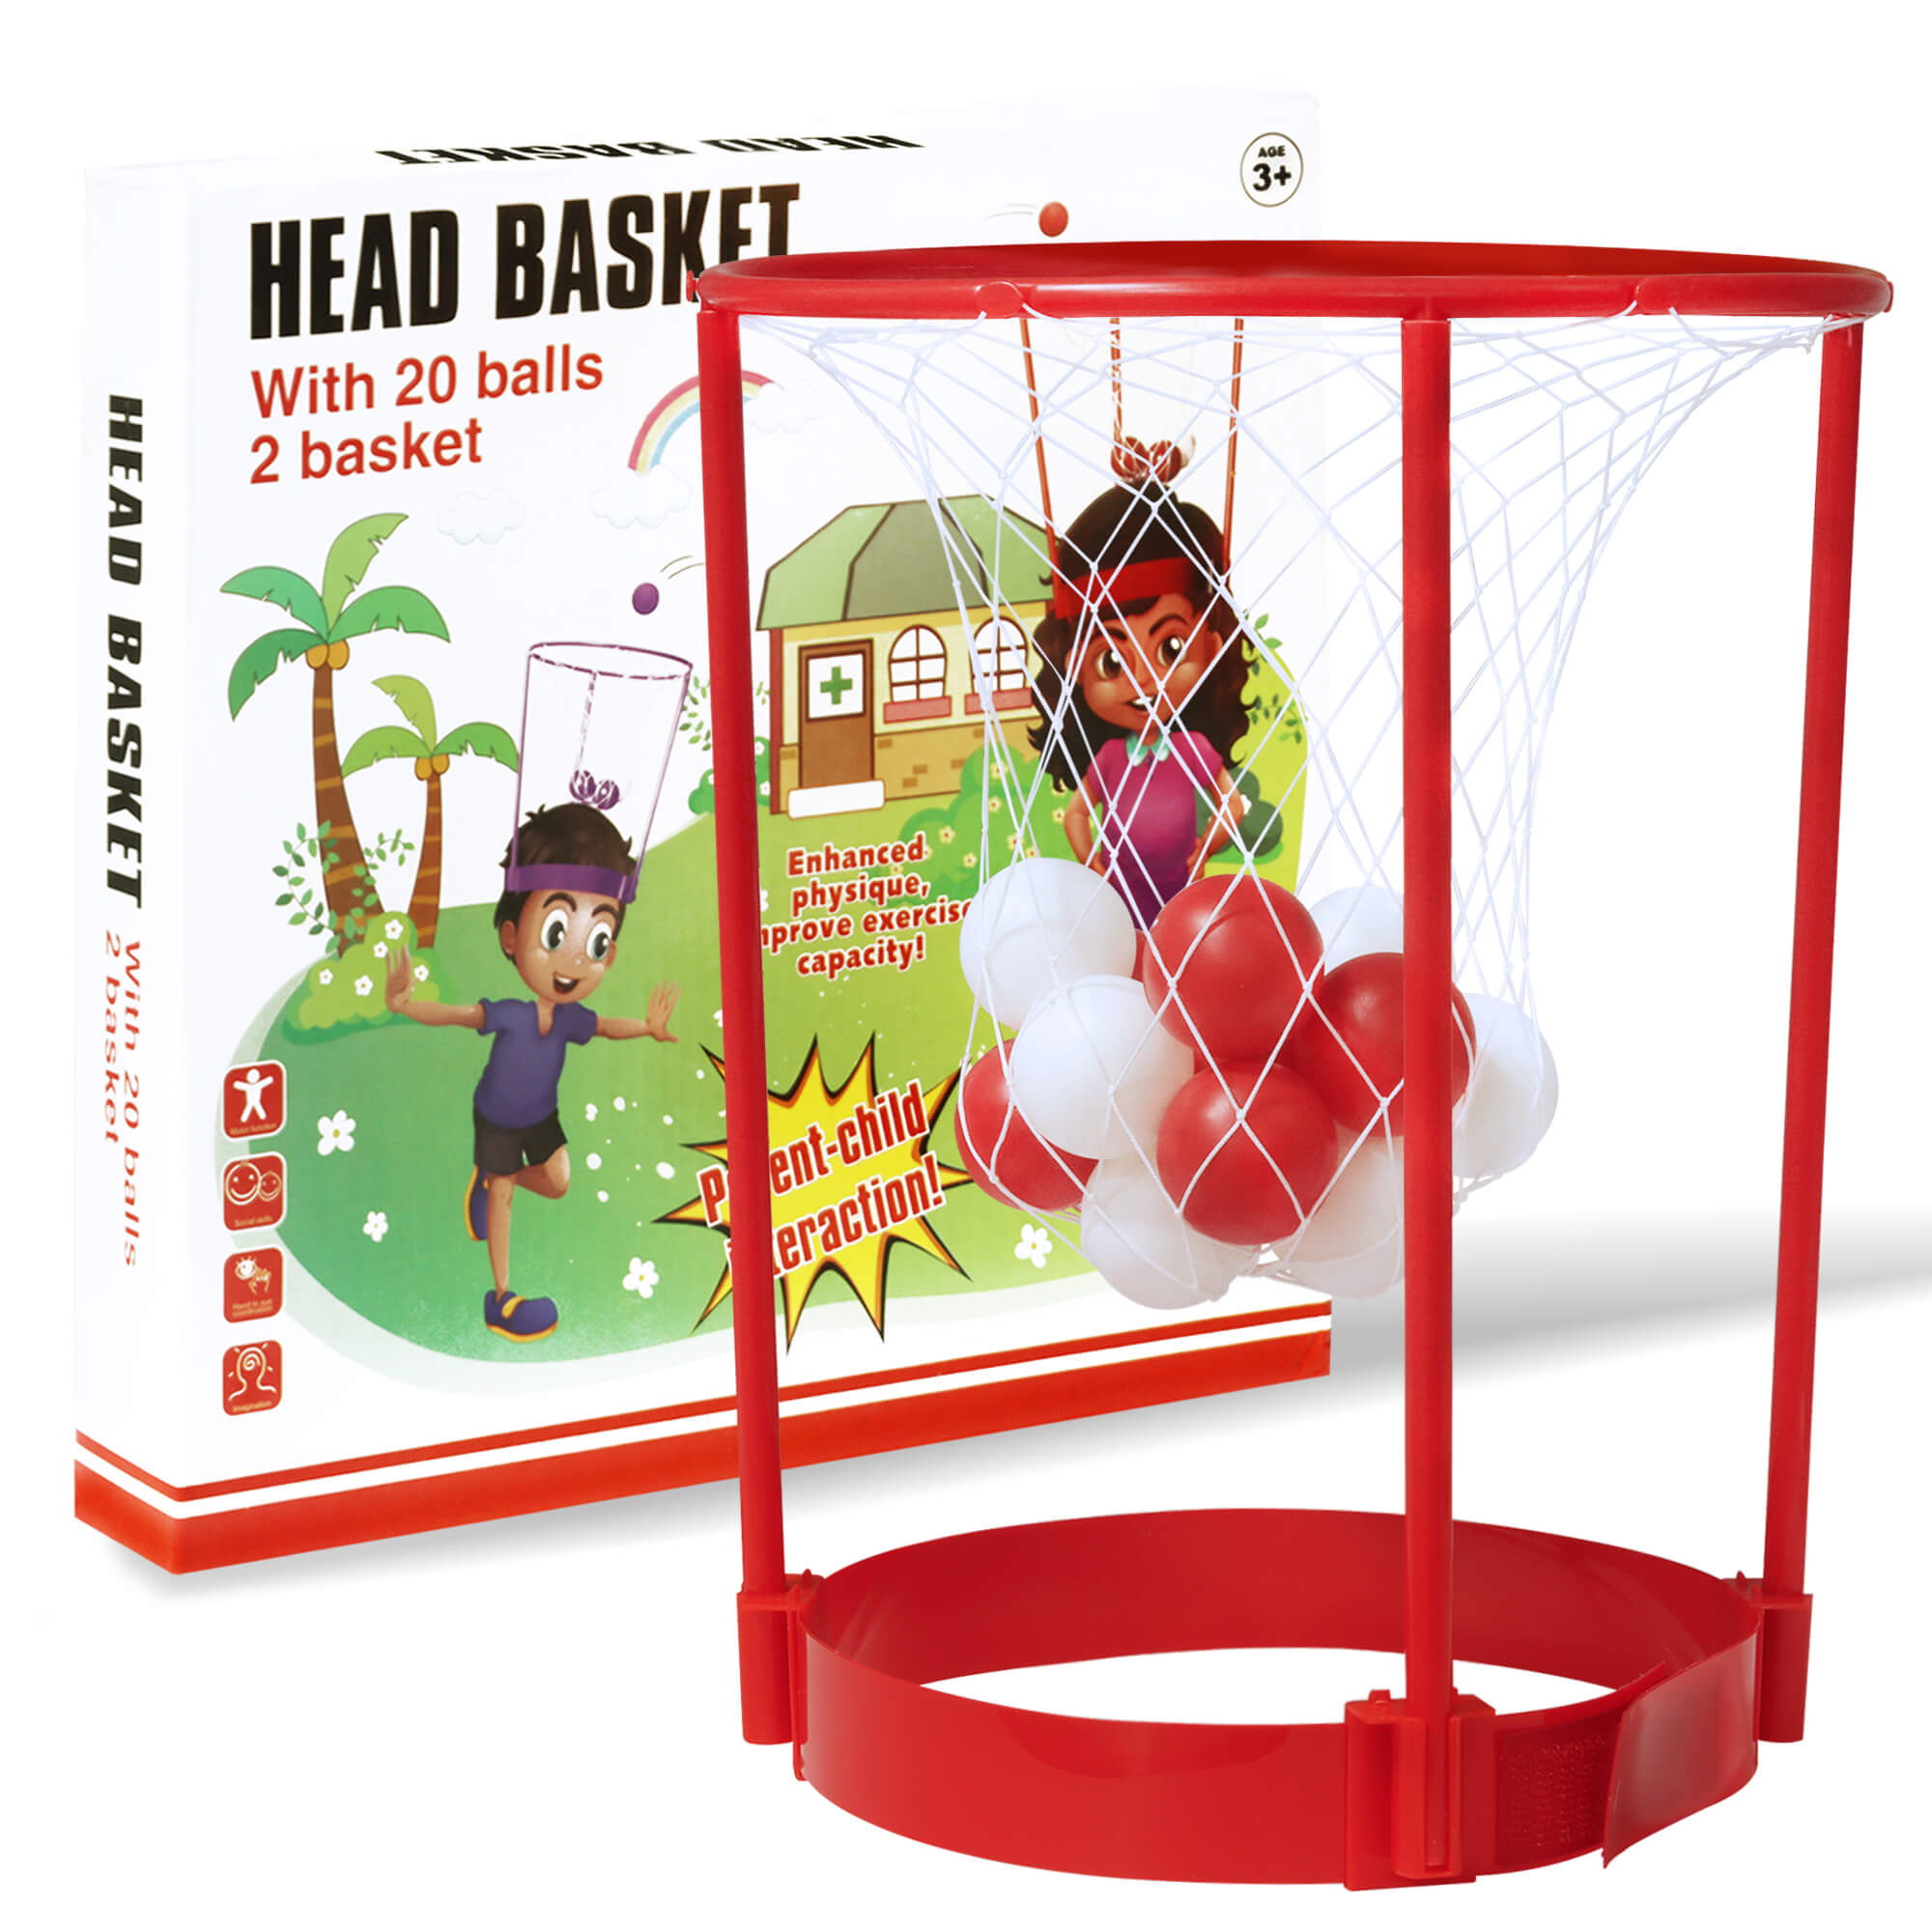 Fun Party Head Hoop Game Basketball Outdoor Party Game Kids Adults Activity 